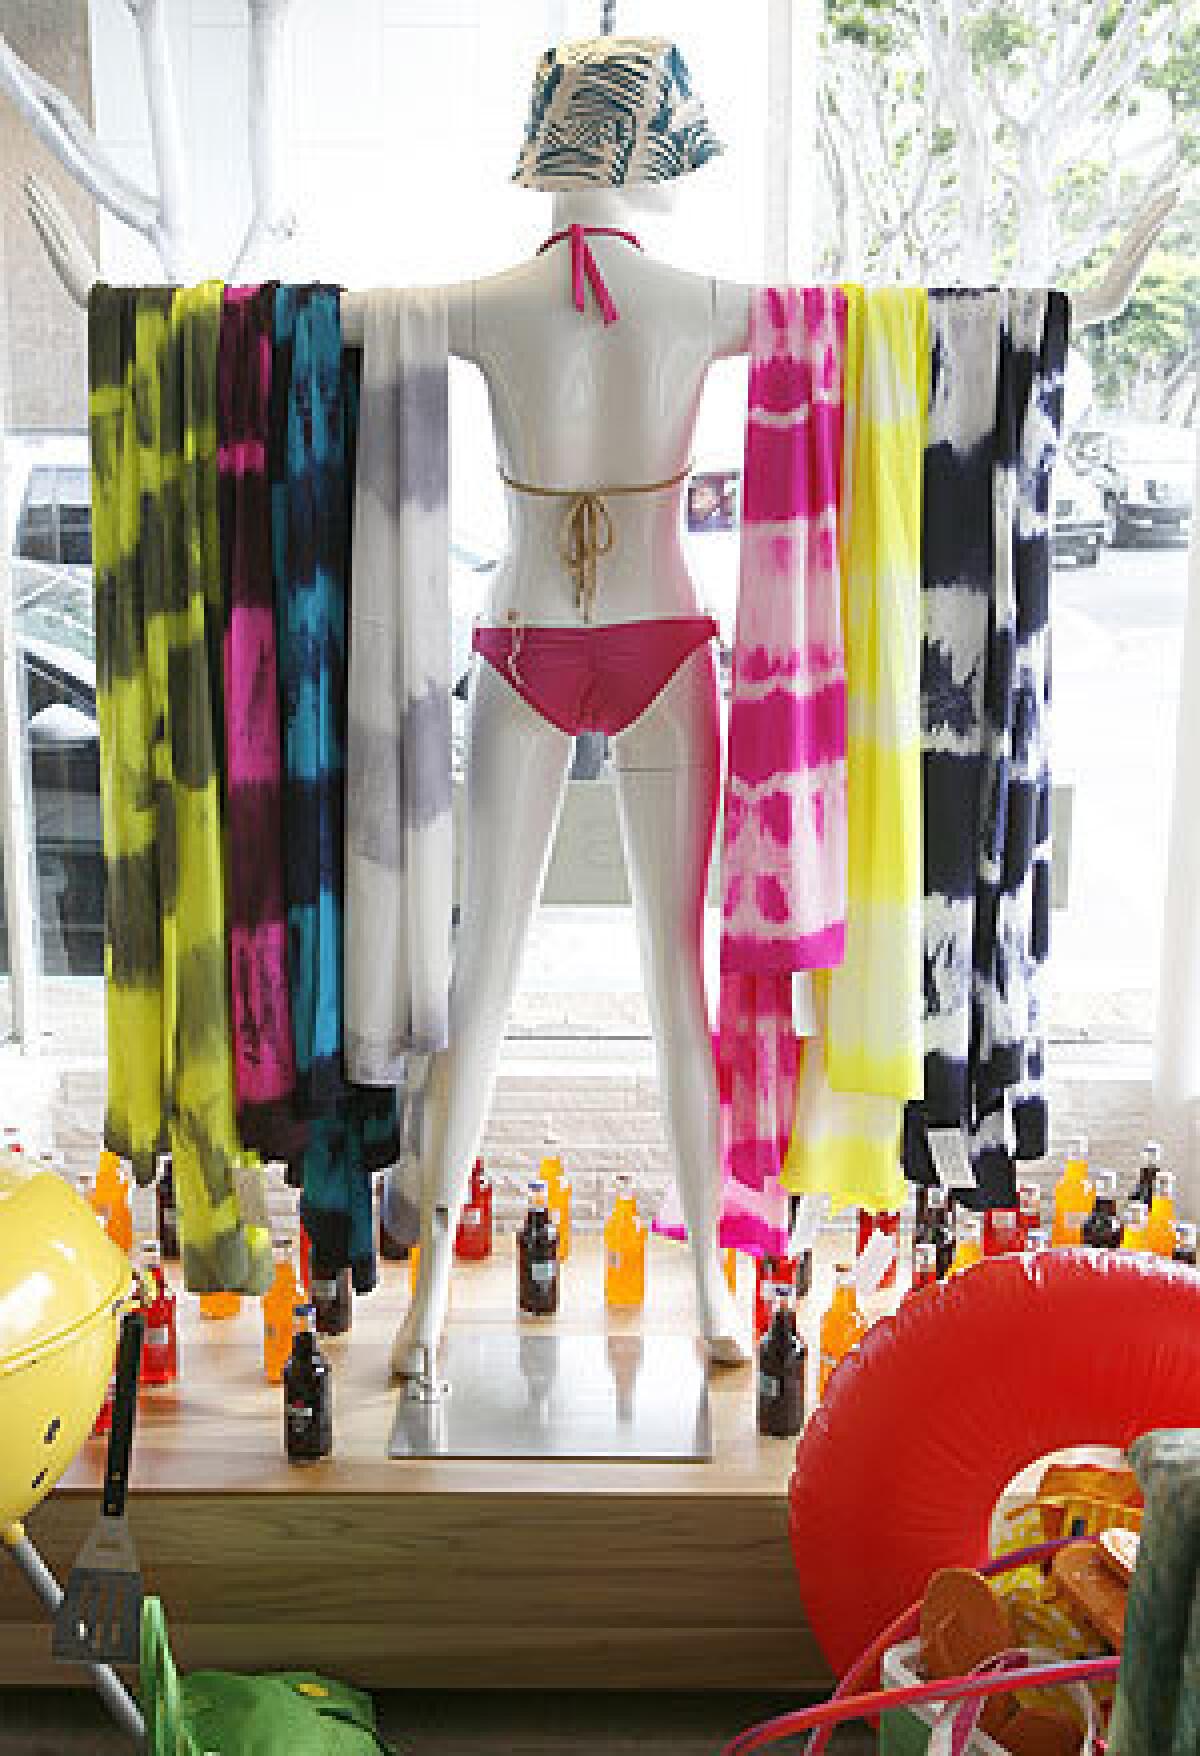 Bright scarves sell quickly at Laguna Supply, purveyor of breezy dresses and tops too.